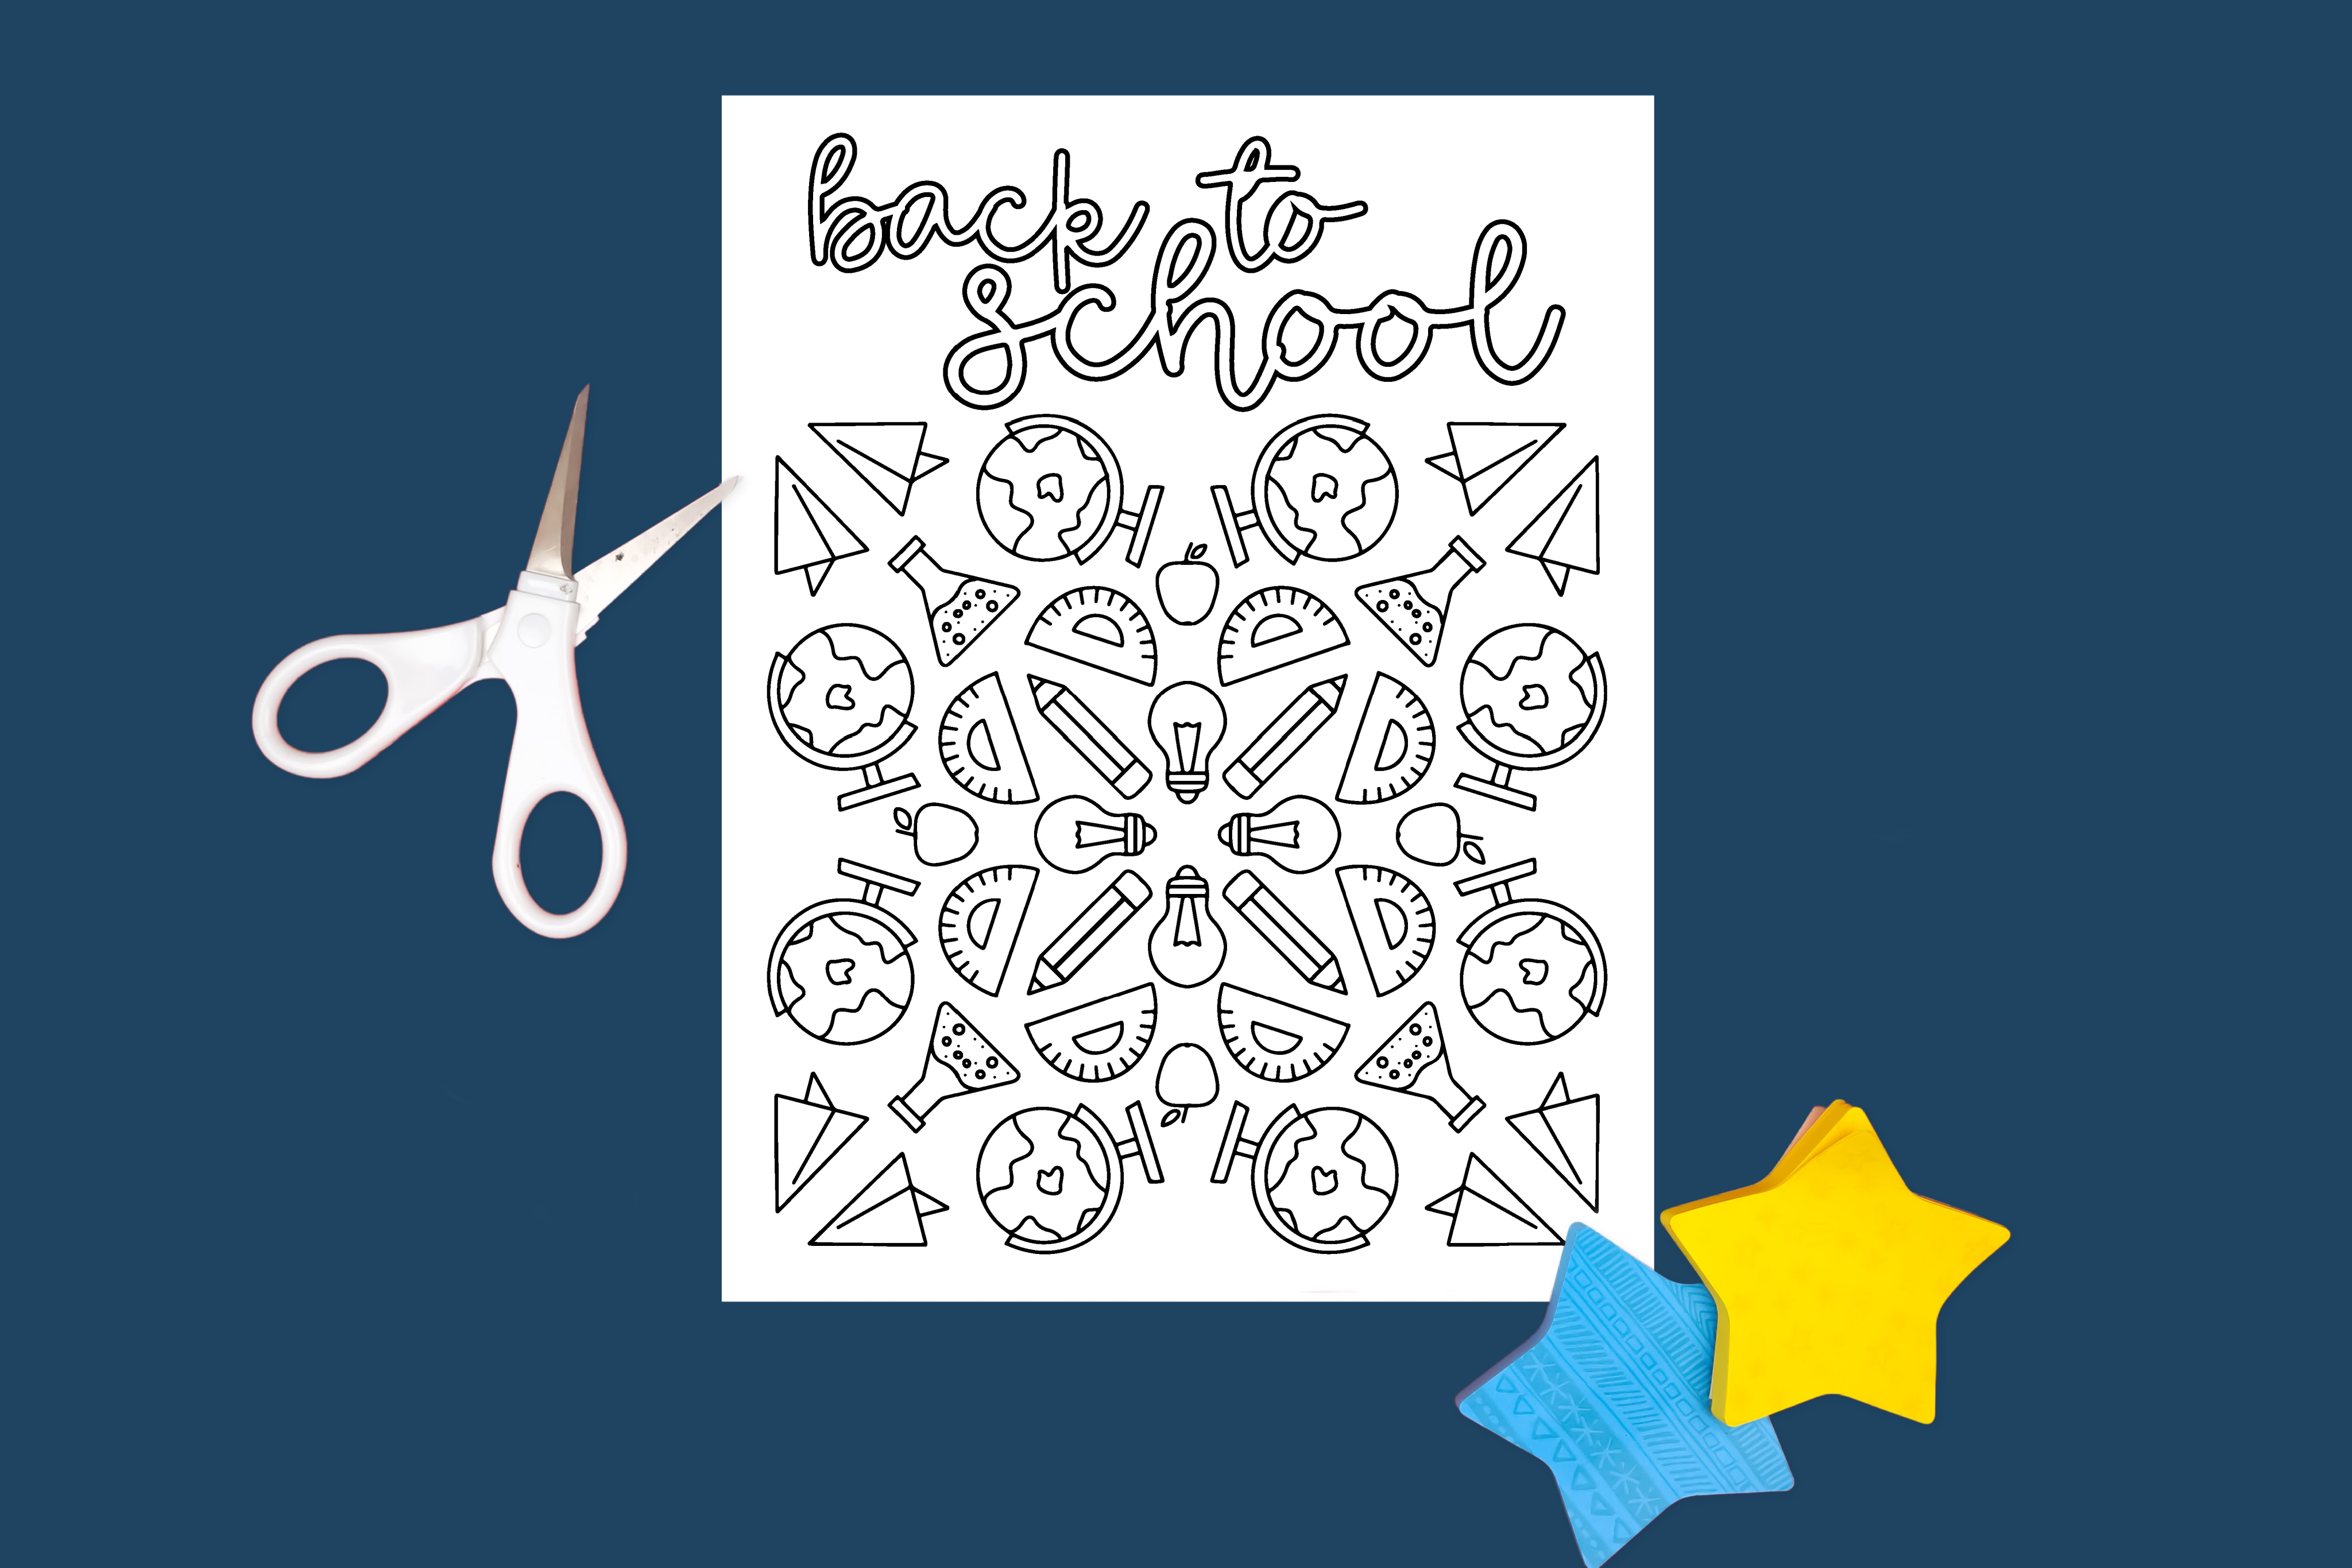 back to school coloring page and school supplies on a blue background